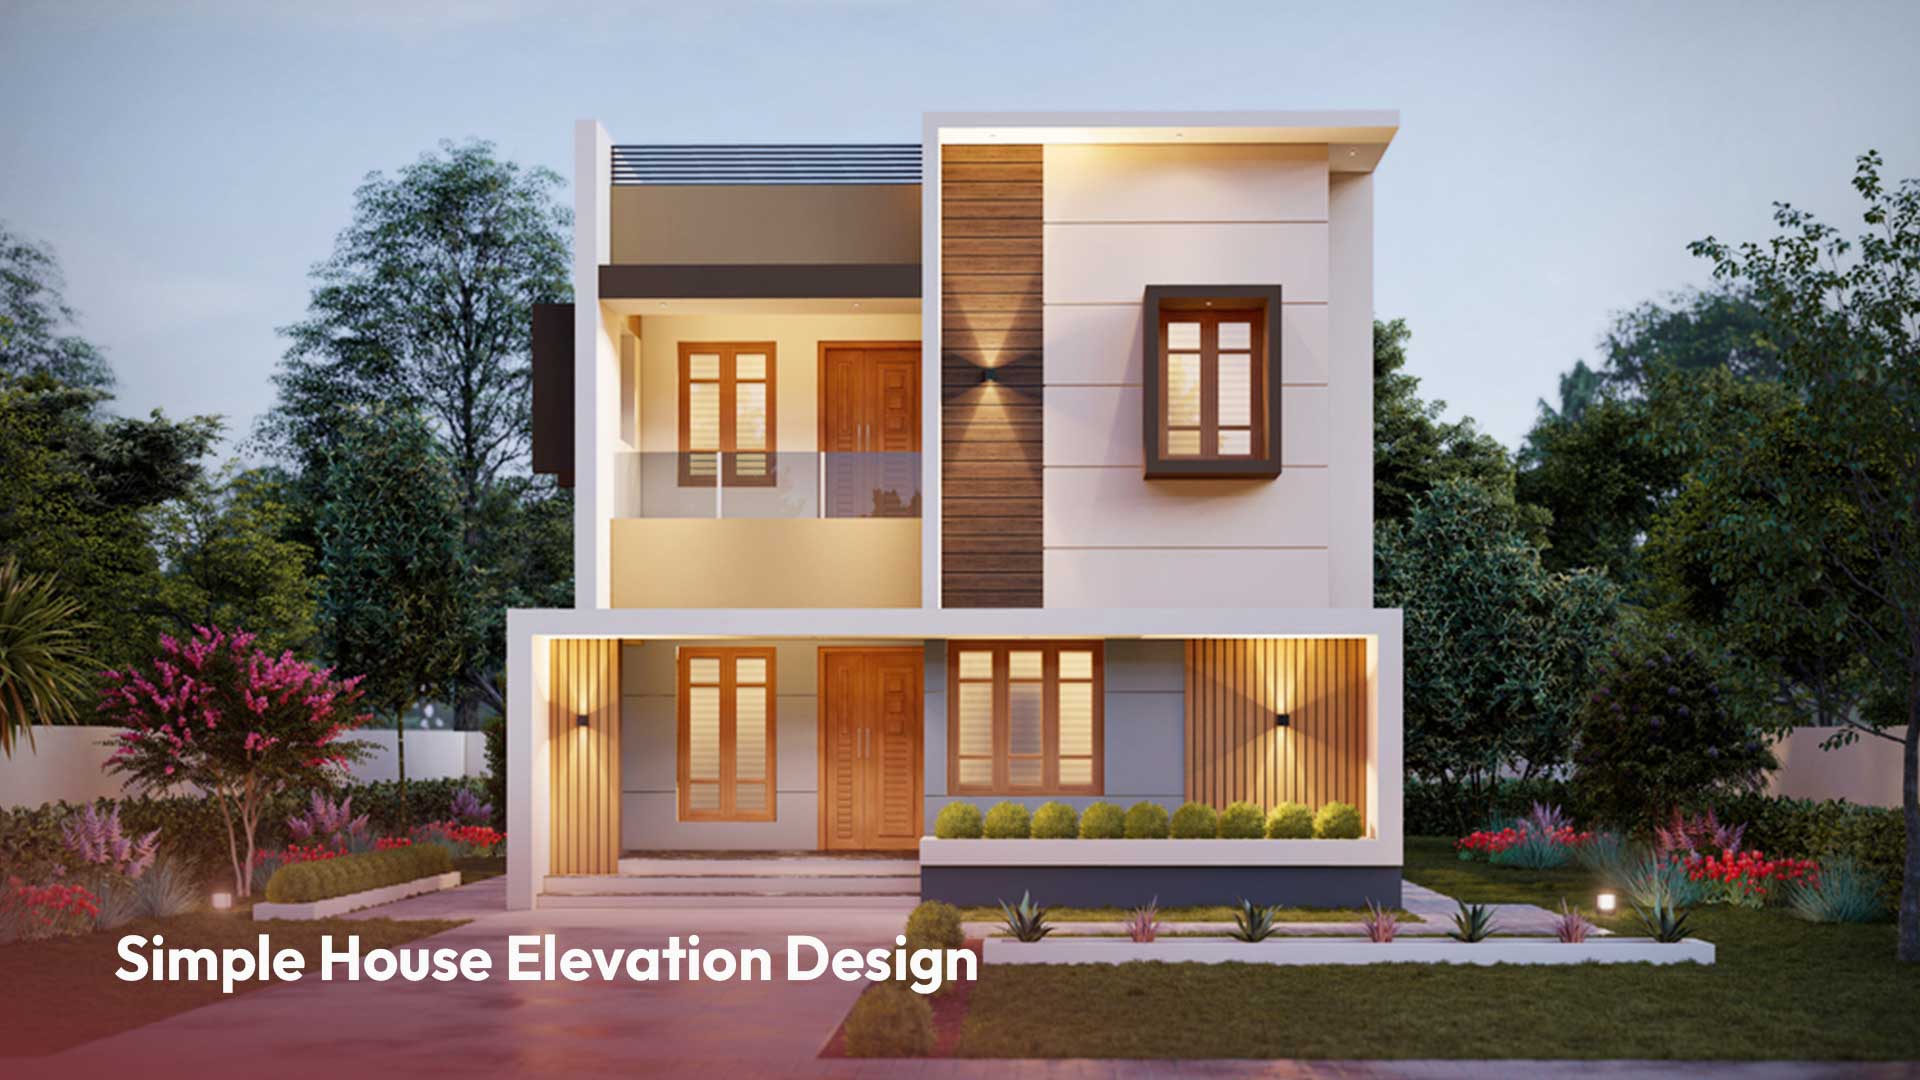 5. Front Elevation Design in Simple Style